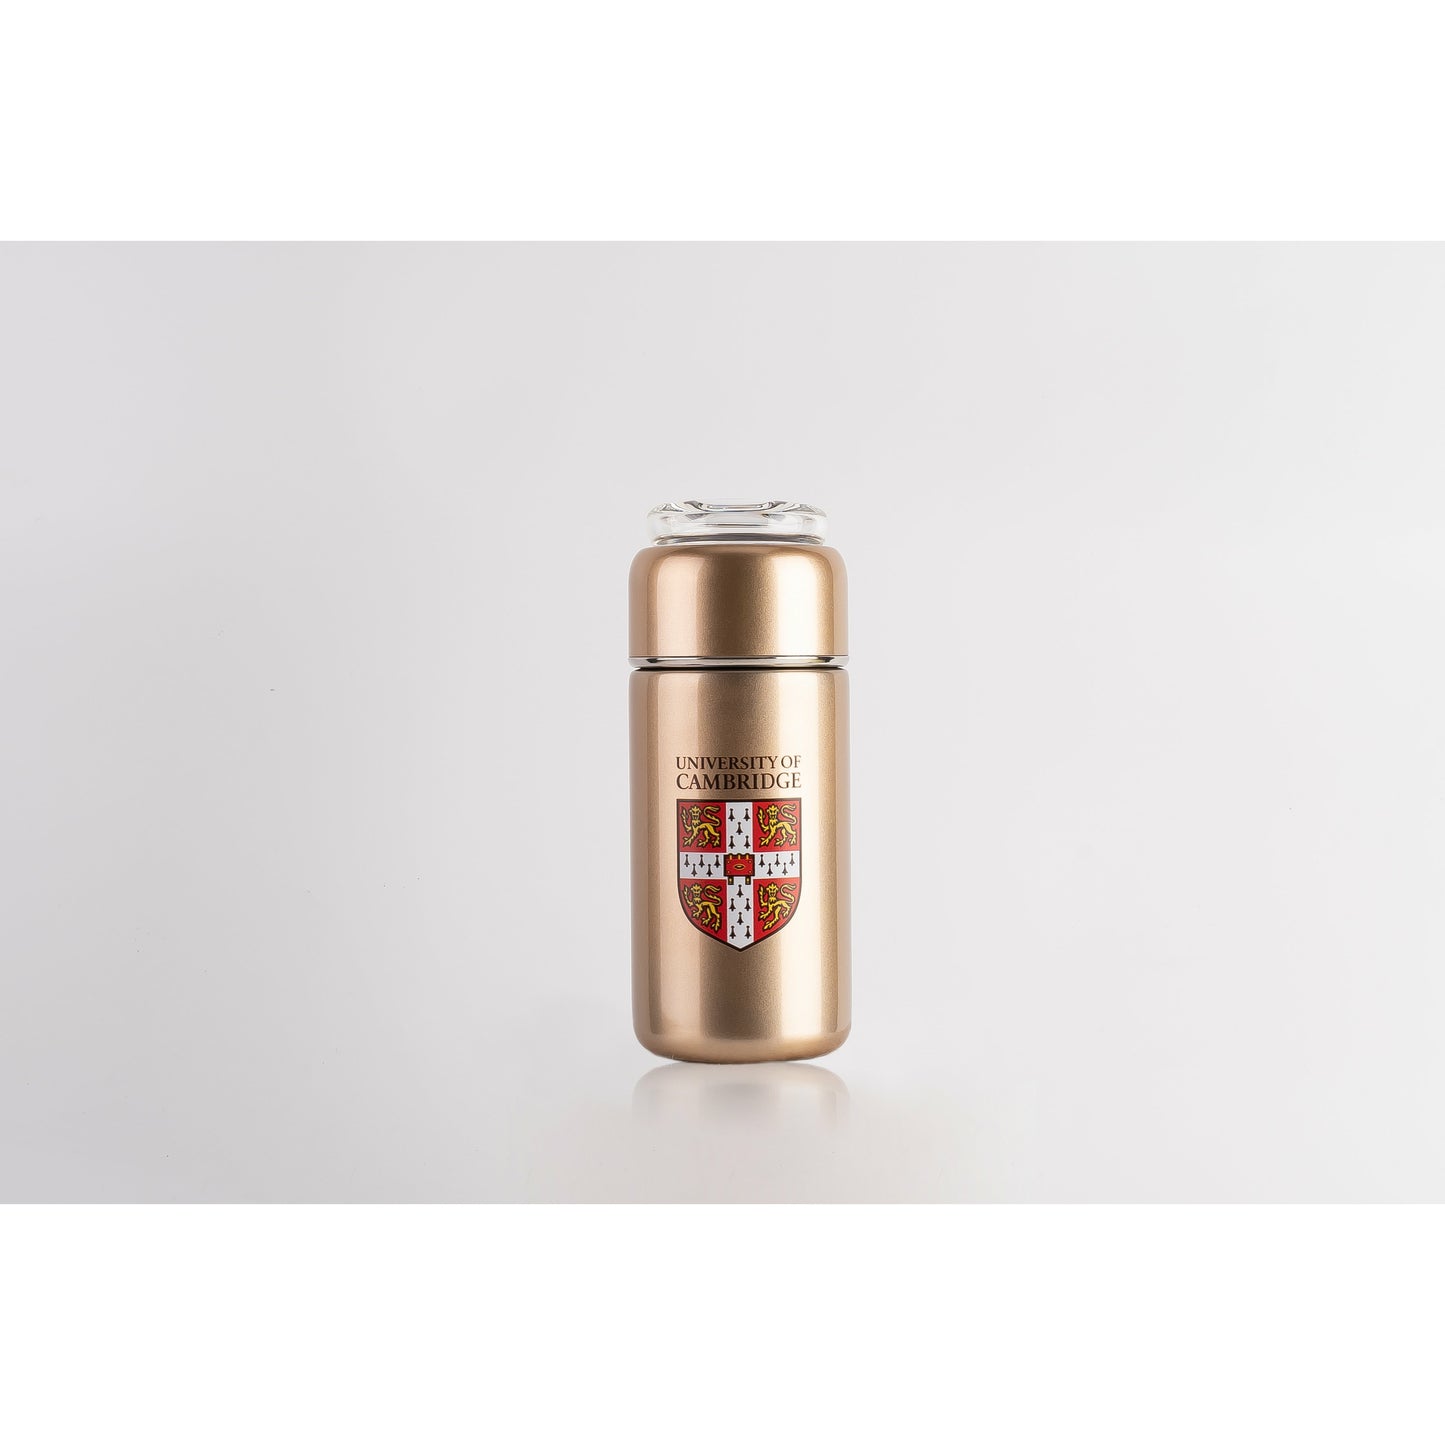 Gold tea infuser with clear glass top, and decorated with University of Cambridge shield.